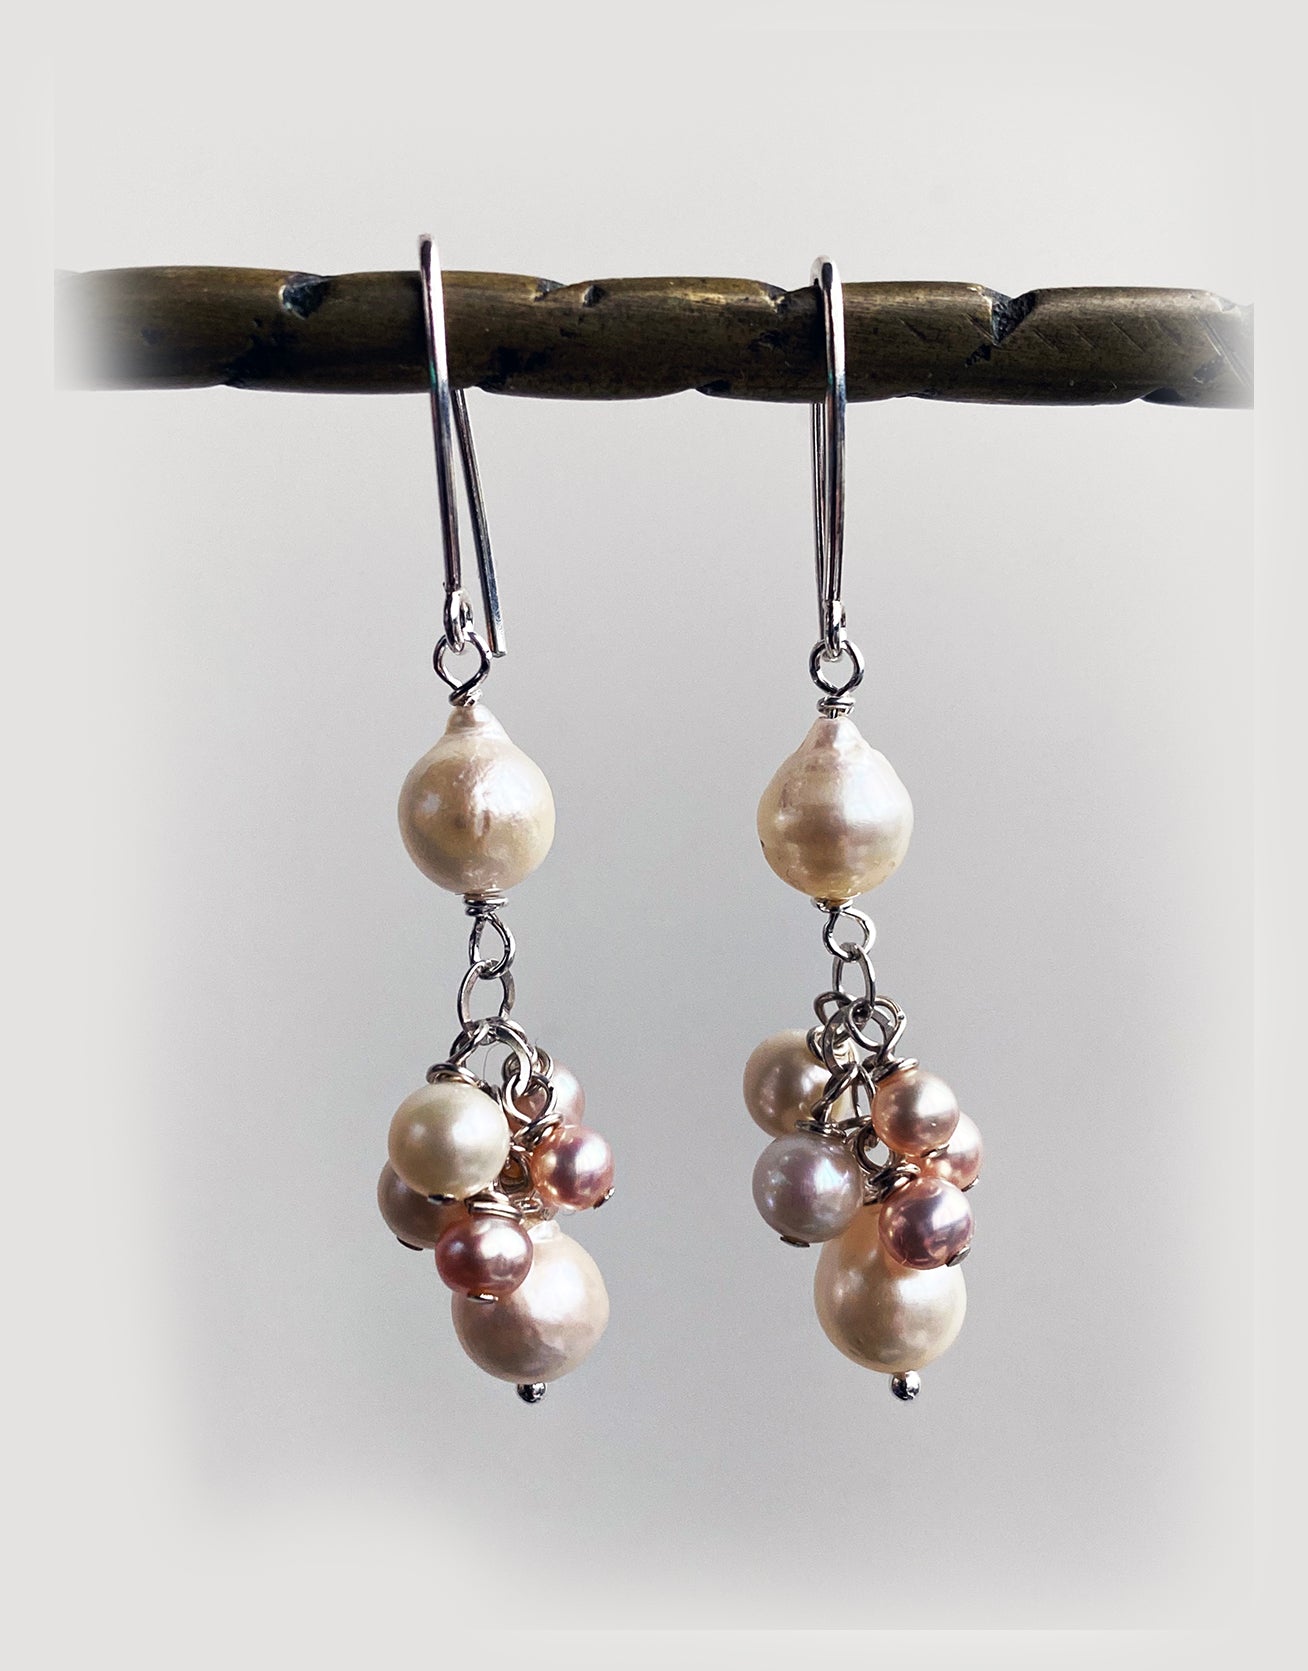 Creamy Akoya Pearls with a White and Champagne Cluster by Linda Queally